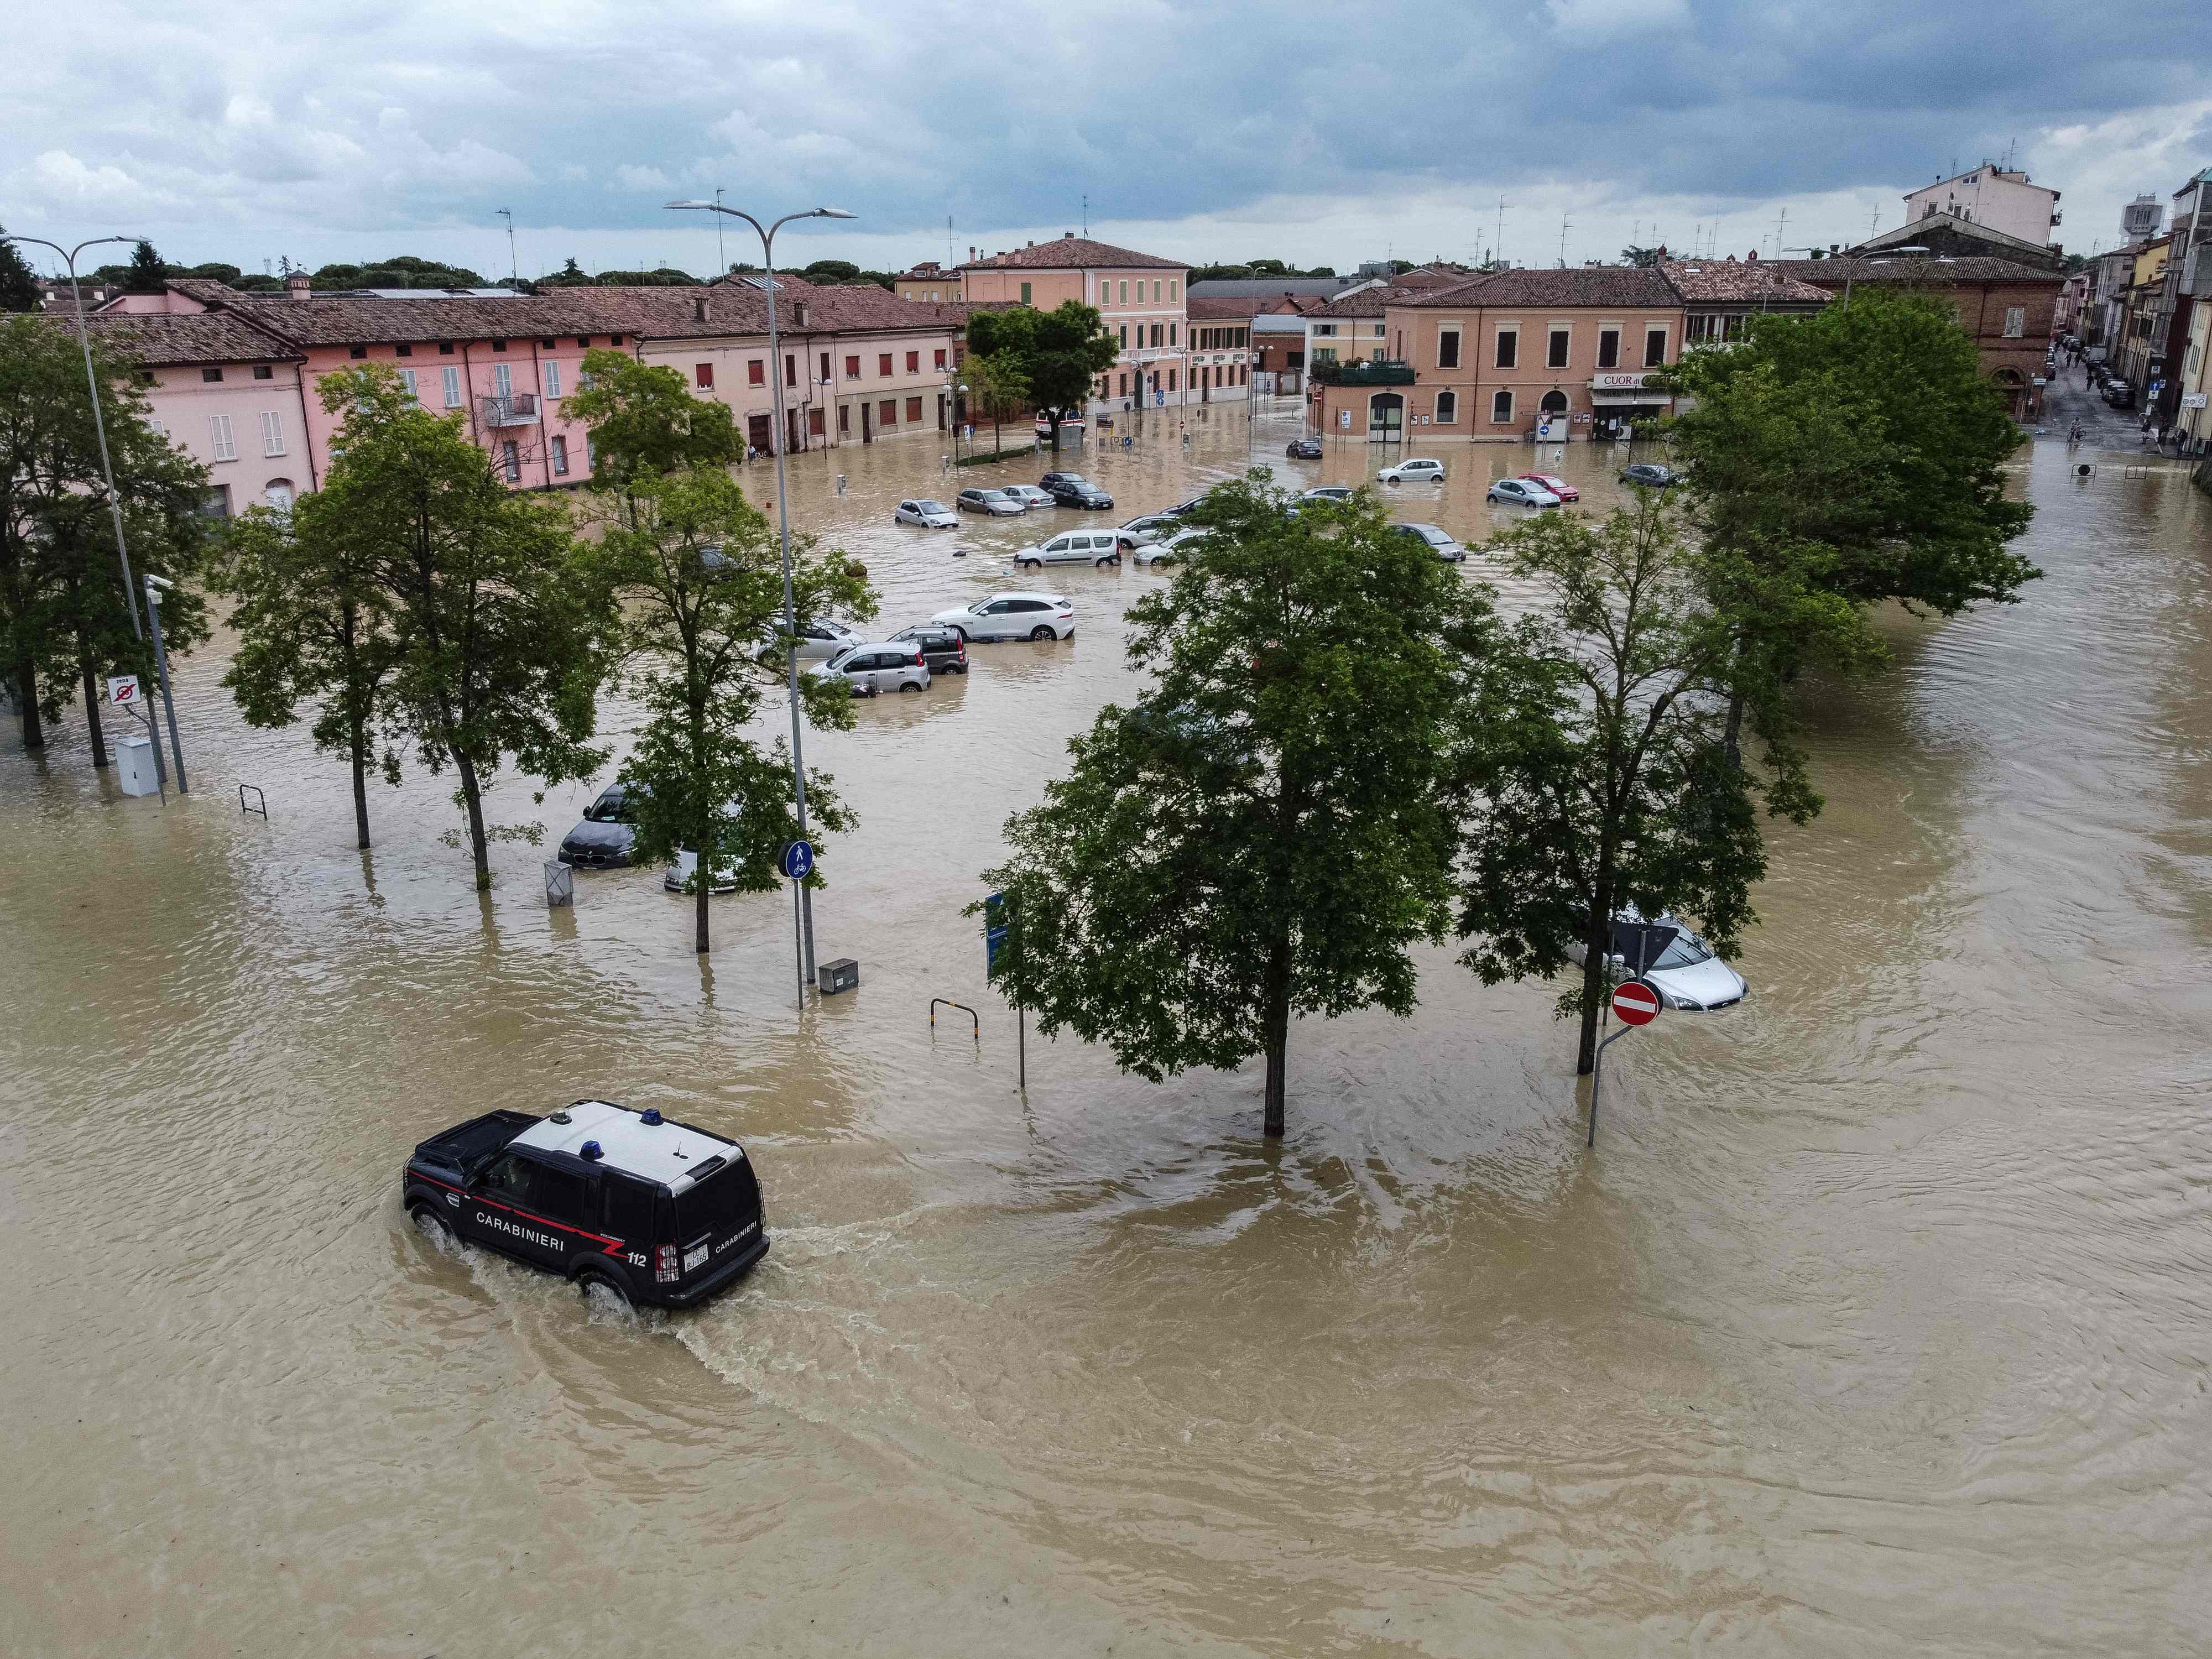 The flooded town square in Lugo, near Ravenna, northern Italy on Thursday